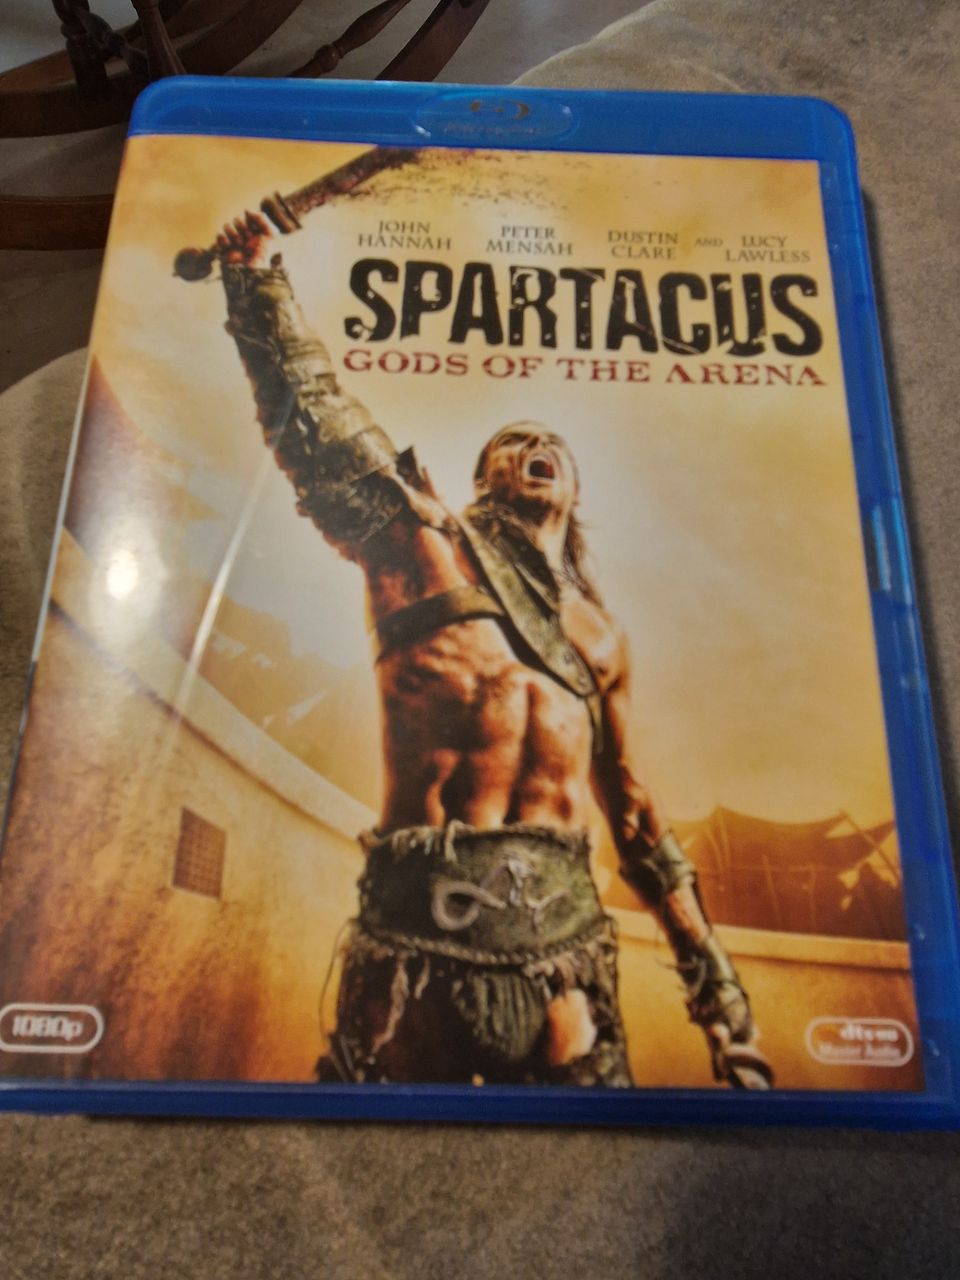 Spartacus gods of the arena bluray